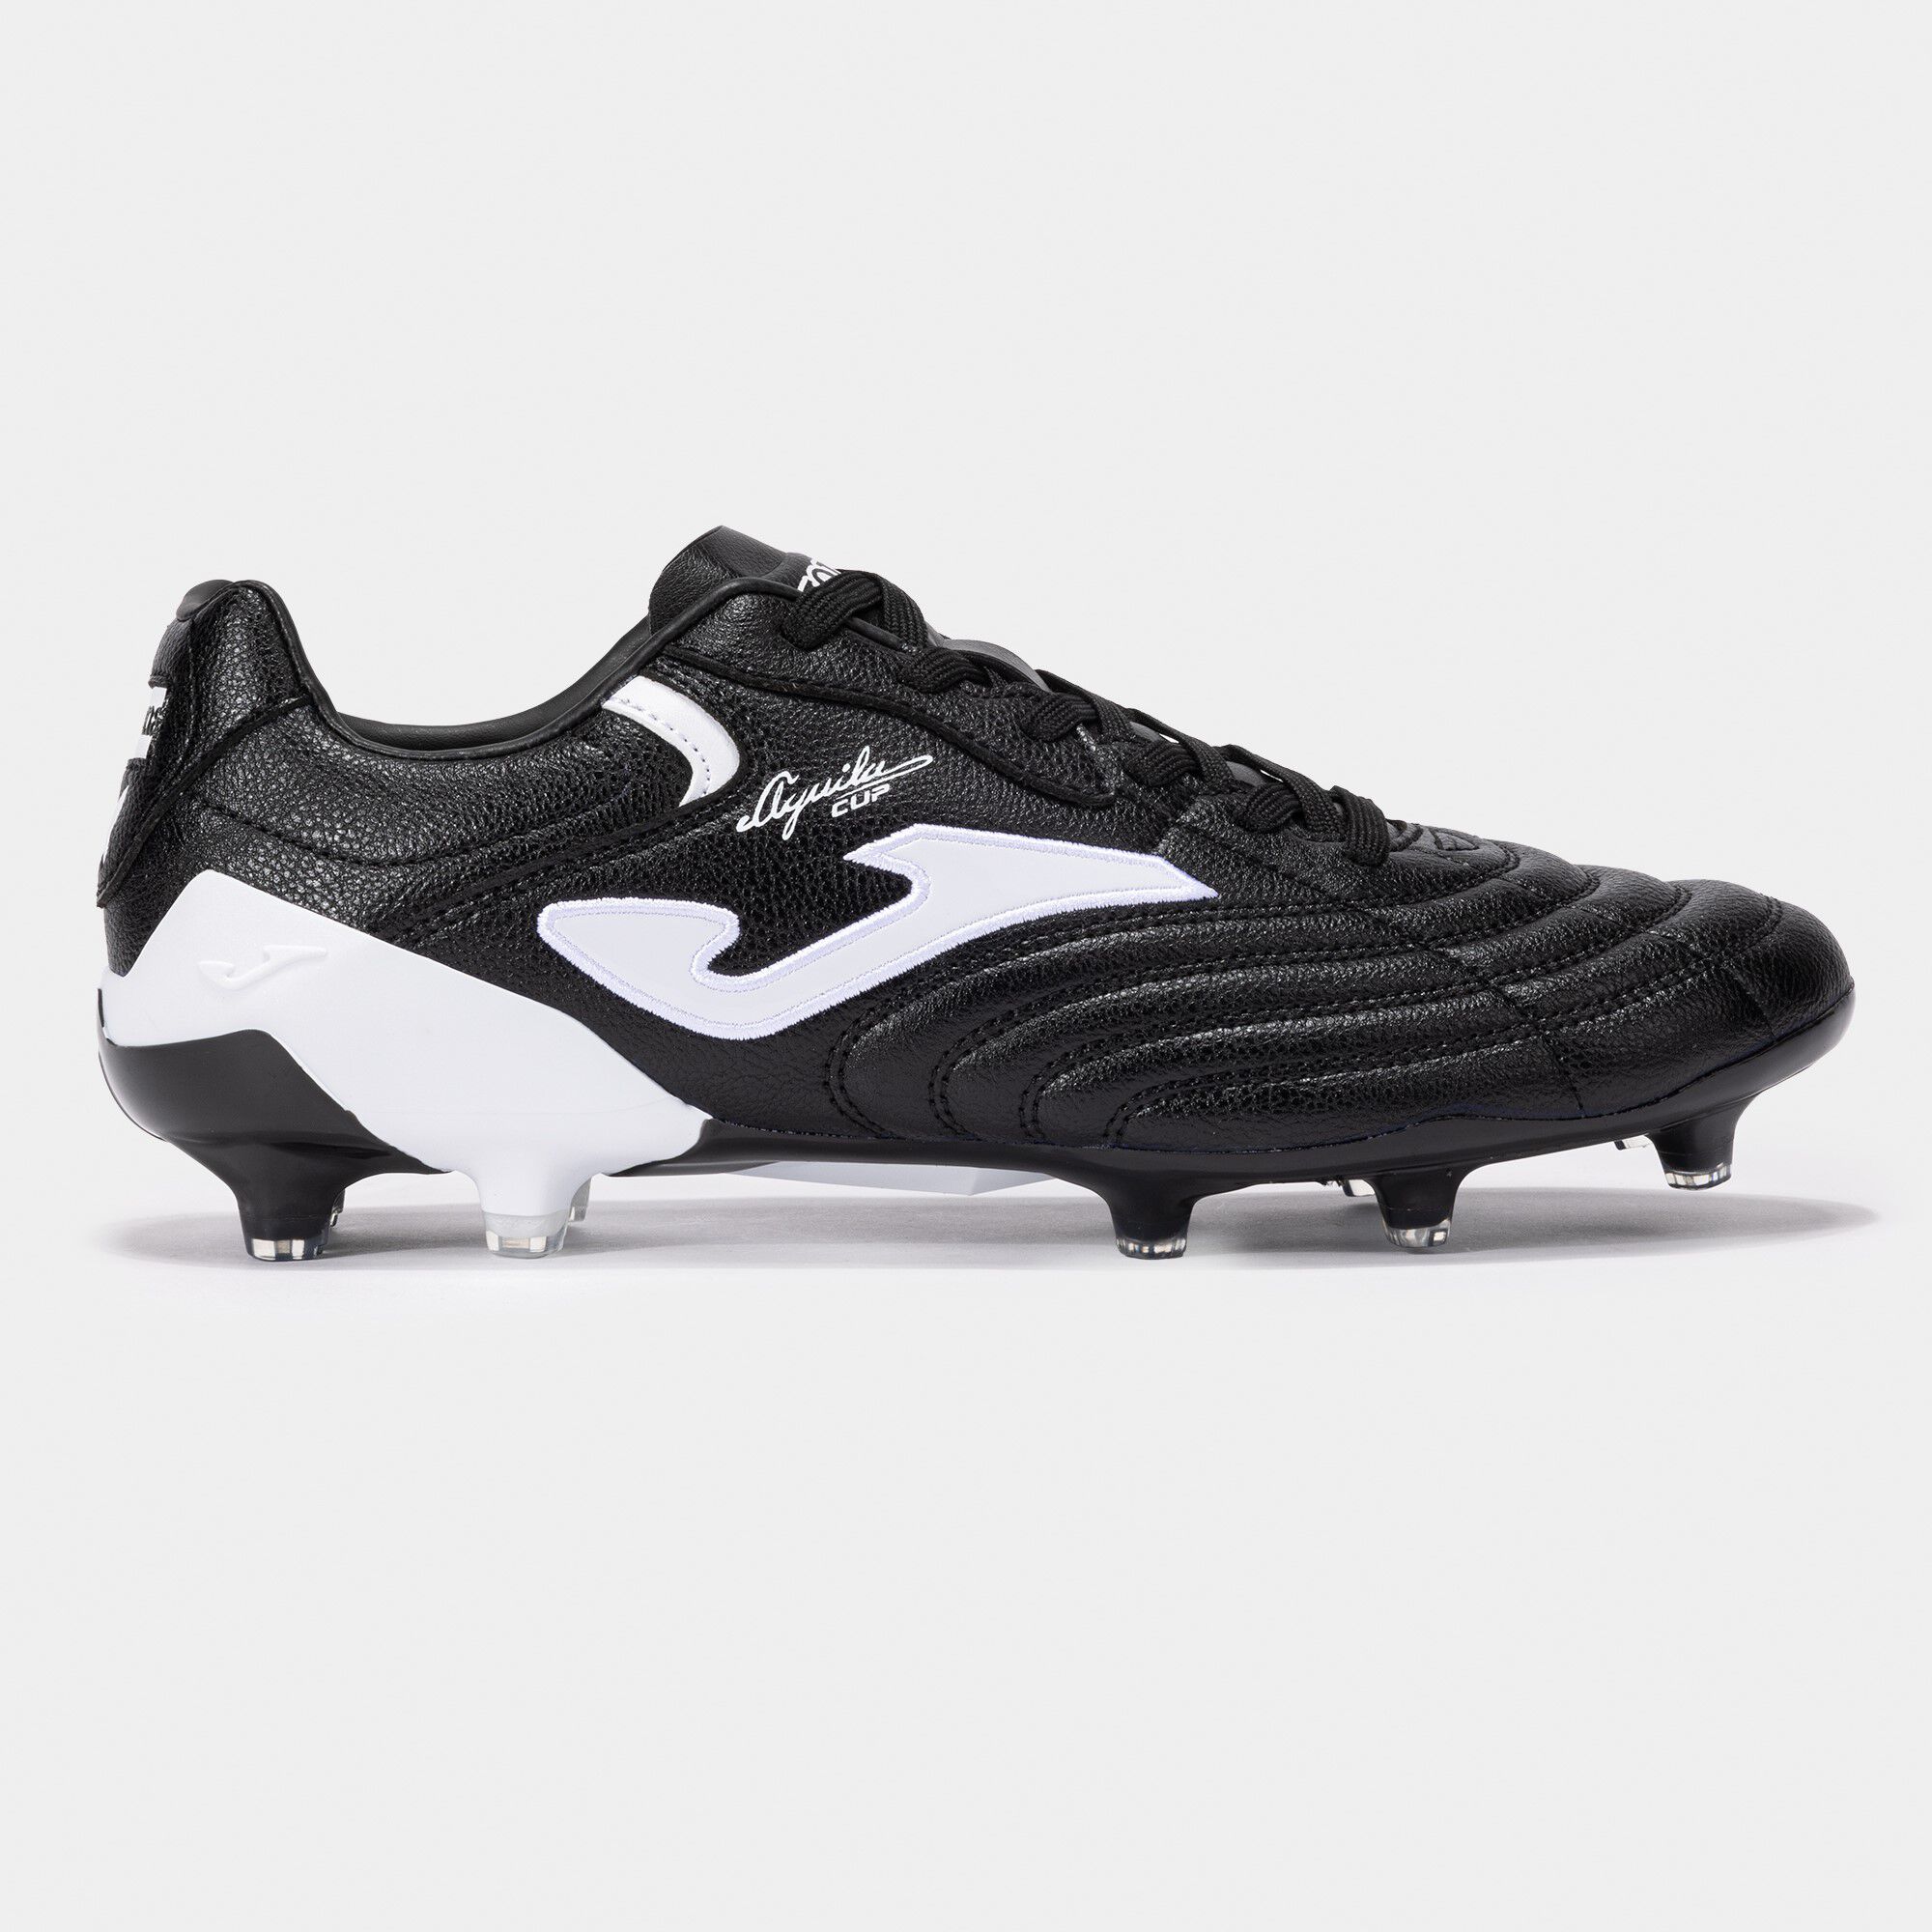 Football boots Aguila Cup 24 firm ground FG black white